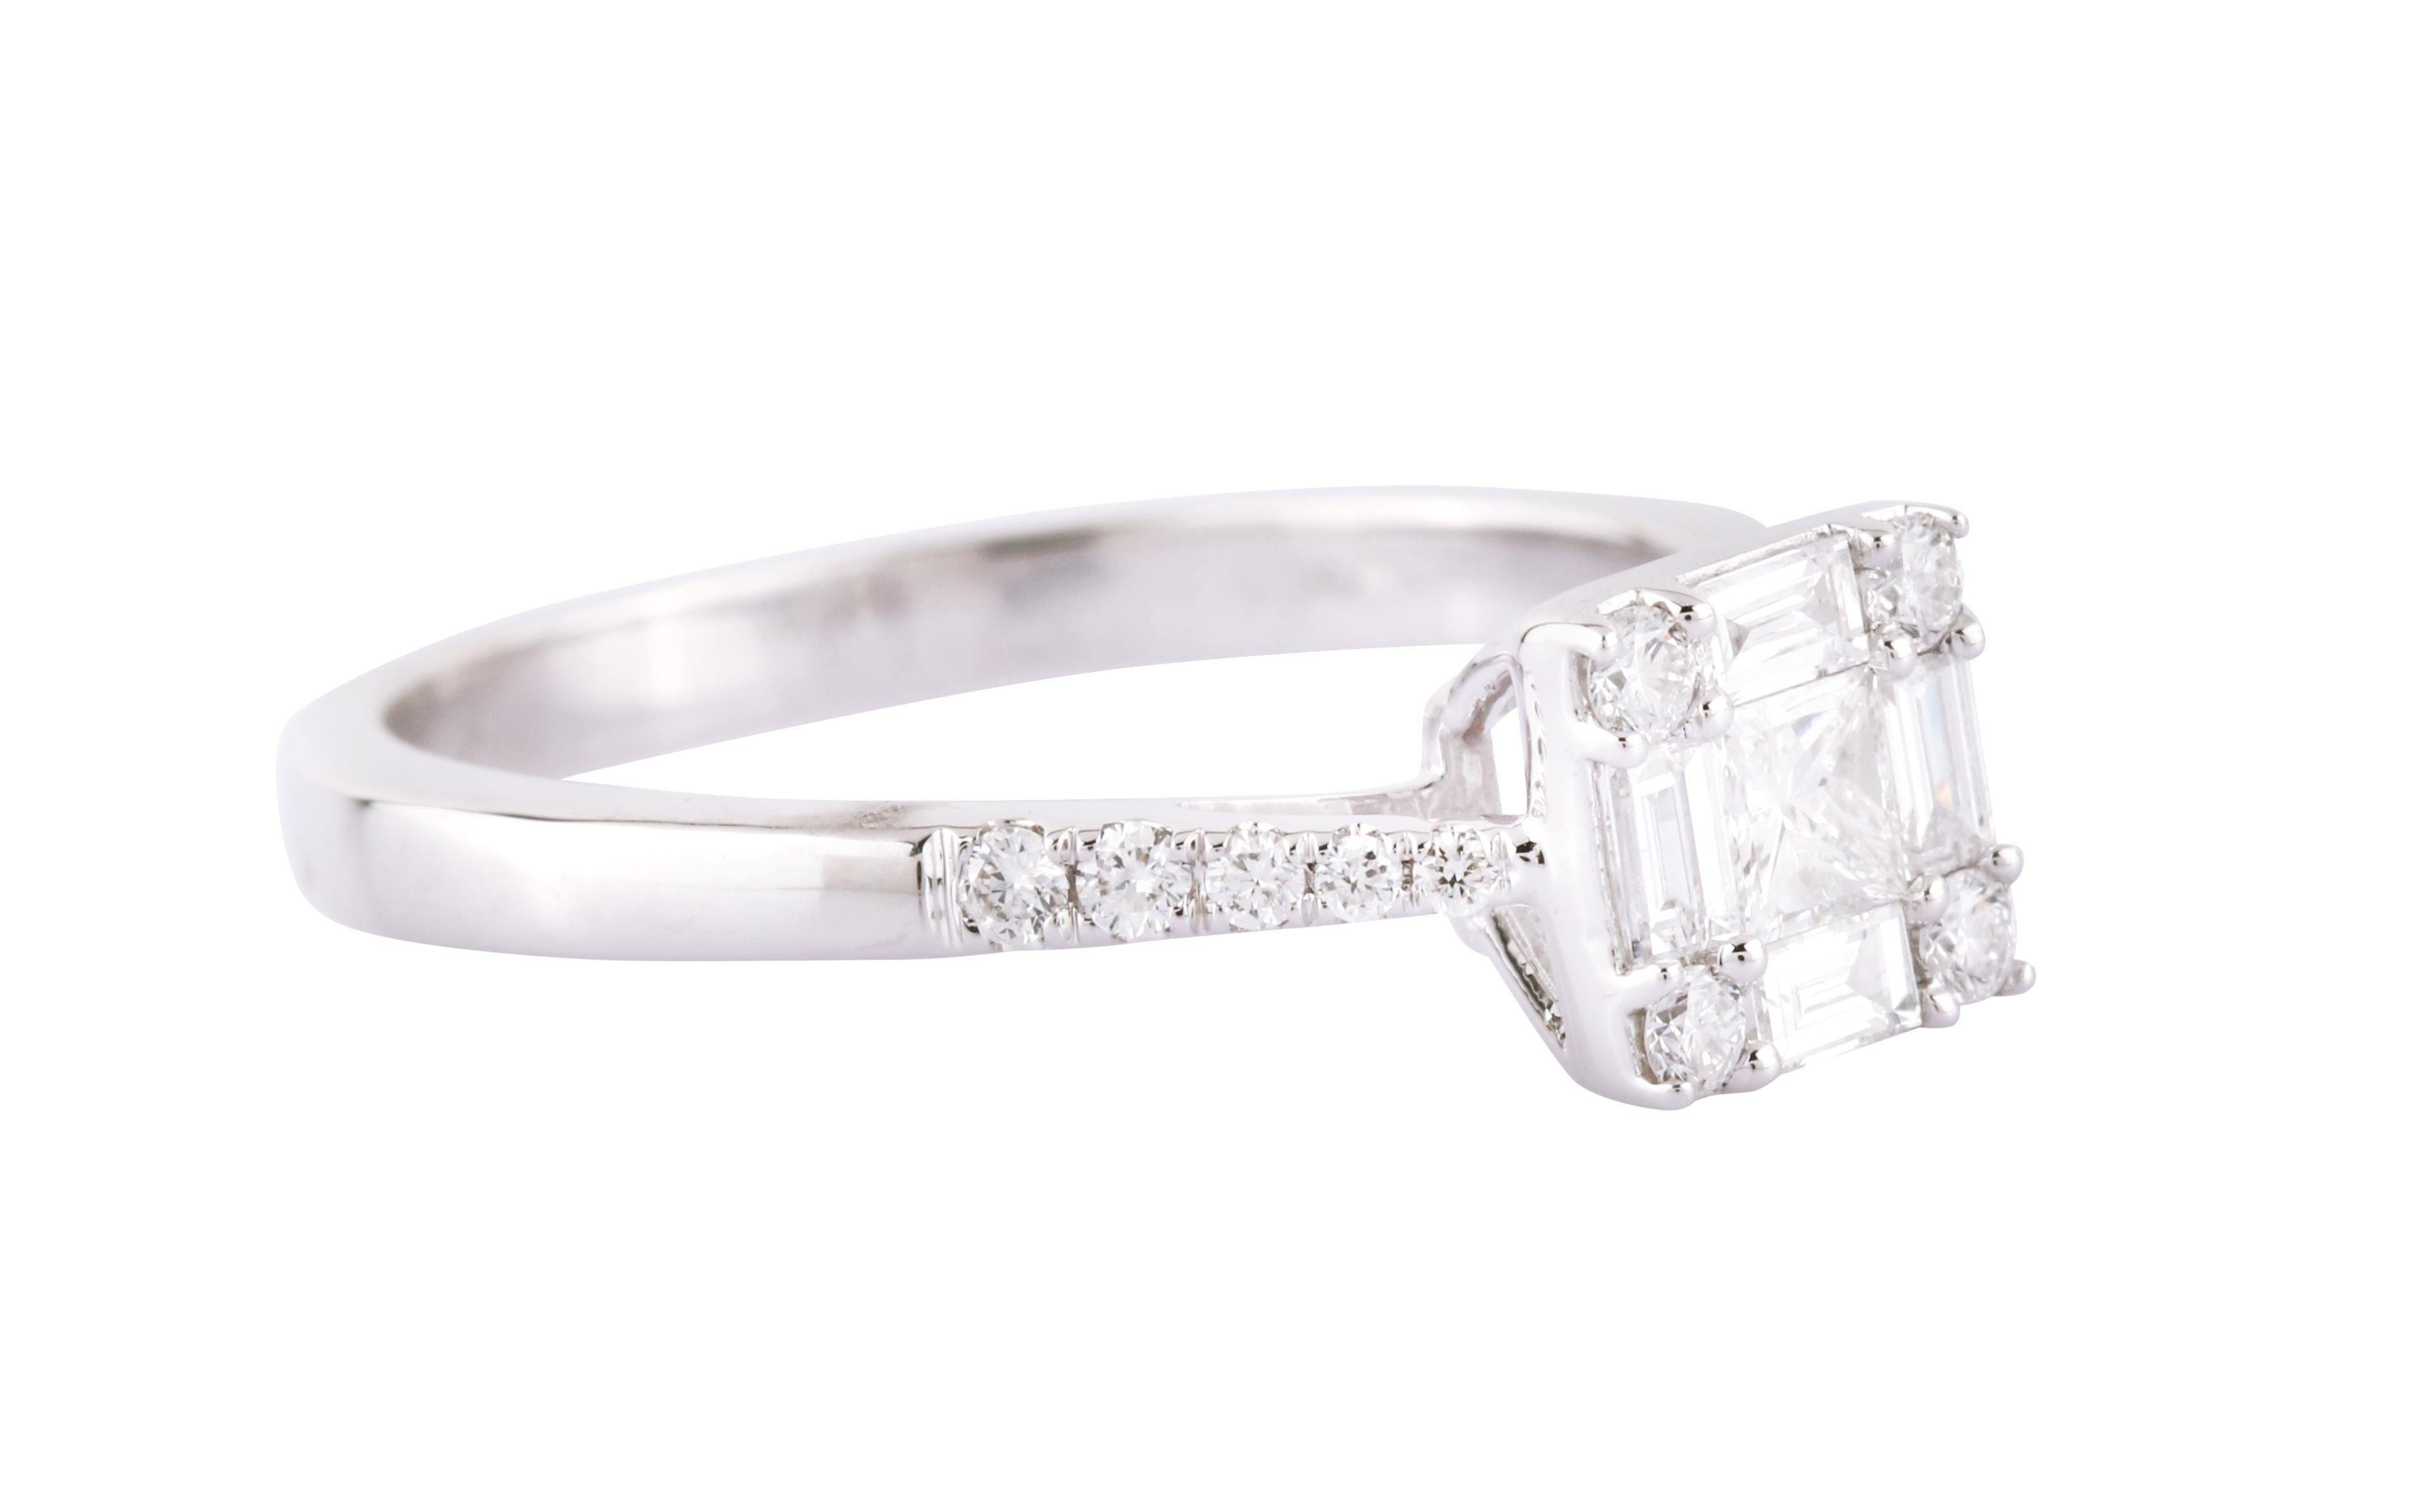 18 Karat White Gold Diamond Solitaire Ring

Coming from the house of classic style, this diamond ring presents one of the finest creations of our collection. They are showered with a classy finish and organic silhouette. Its design is timeless,